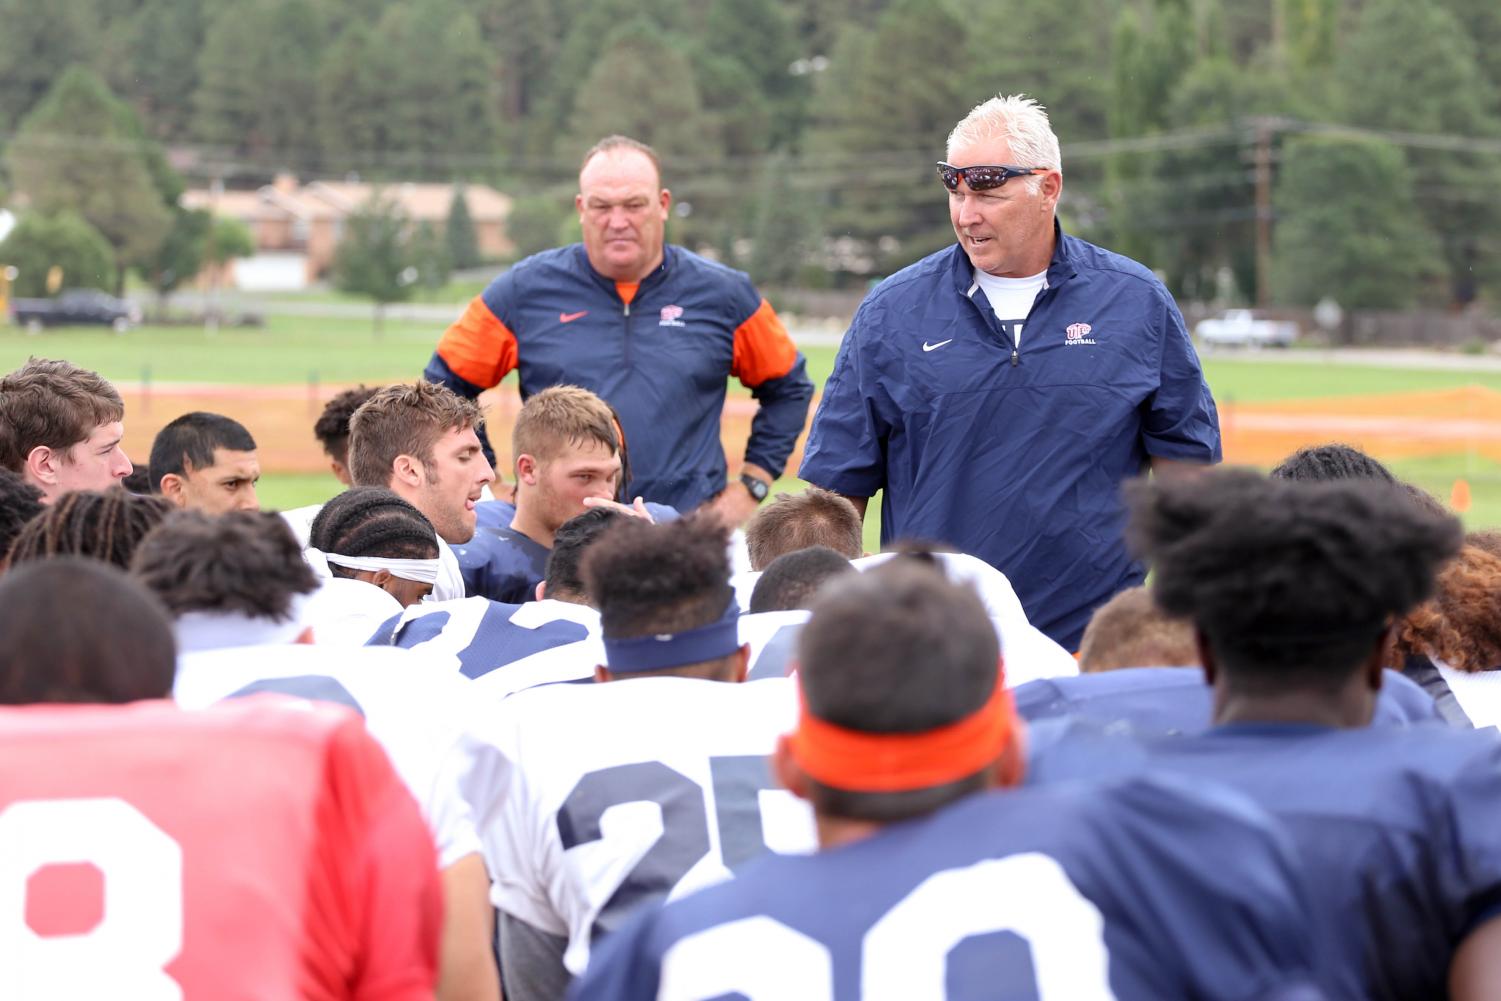 As+camp+Ruidoso+comes+to+an+end+Miners+look+for+offensive+swagger